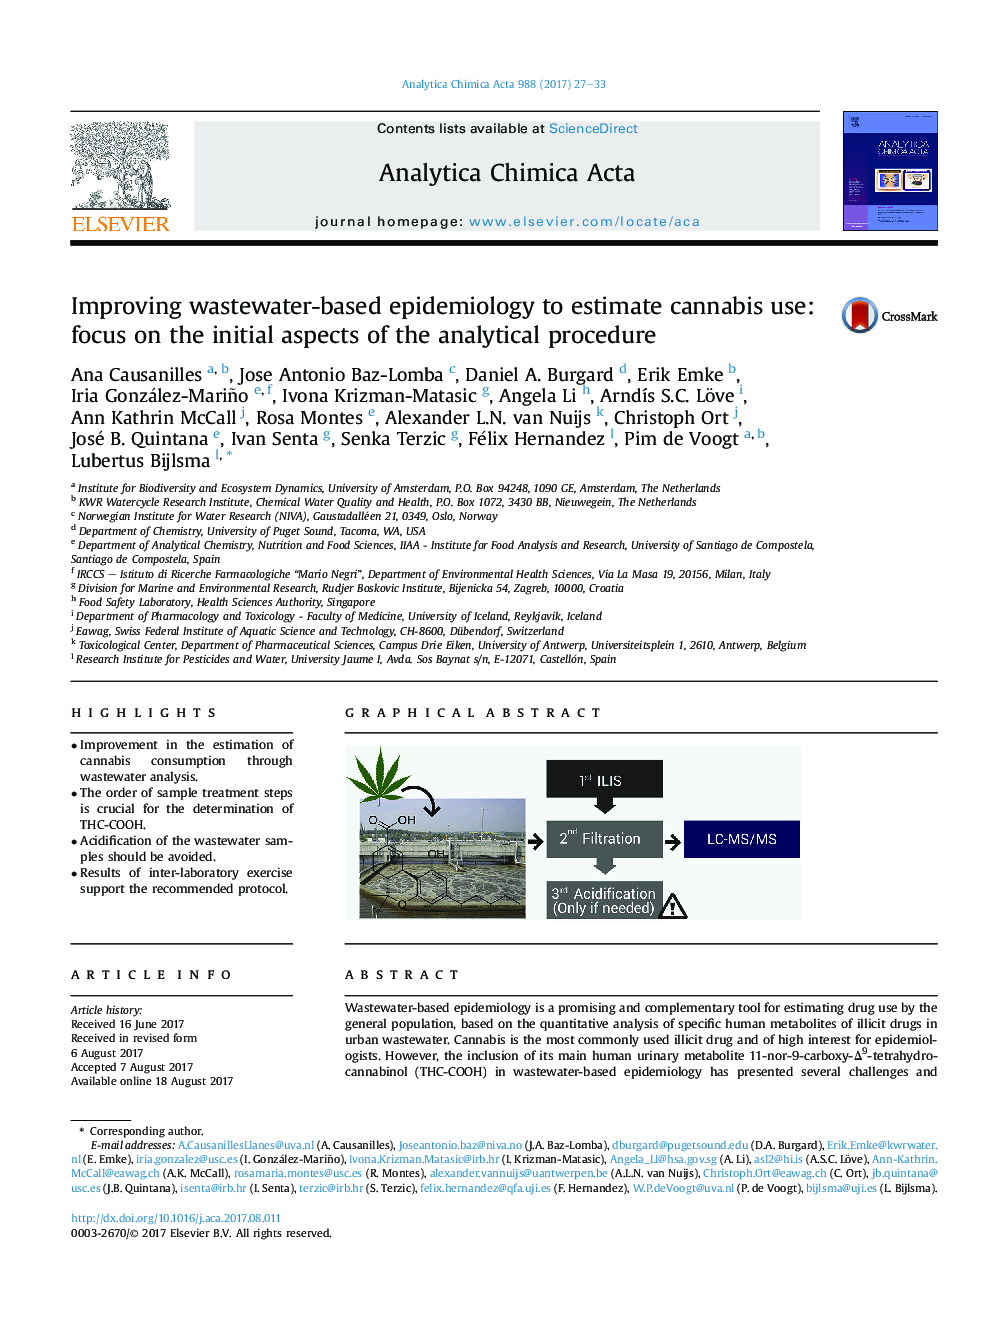 Improving wastewater-based epidemiology to estimate cannabis use: focus on the initial aspects of the analytical procedure